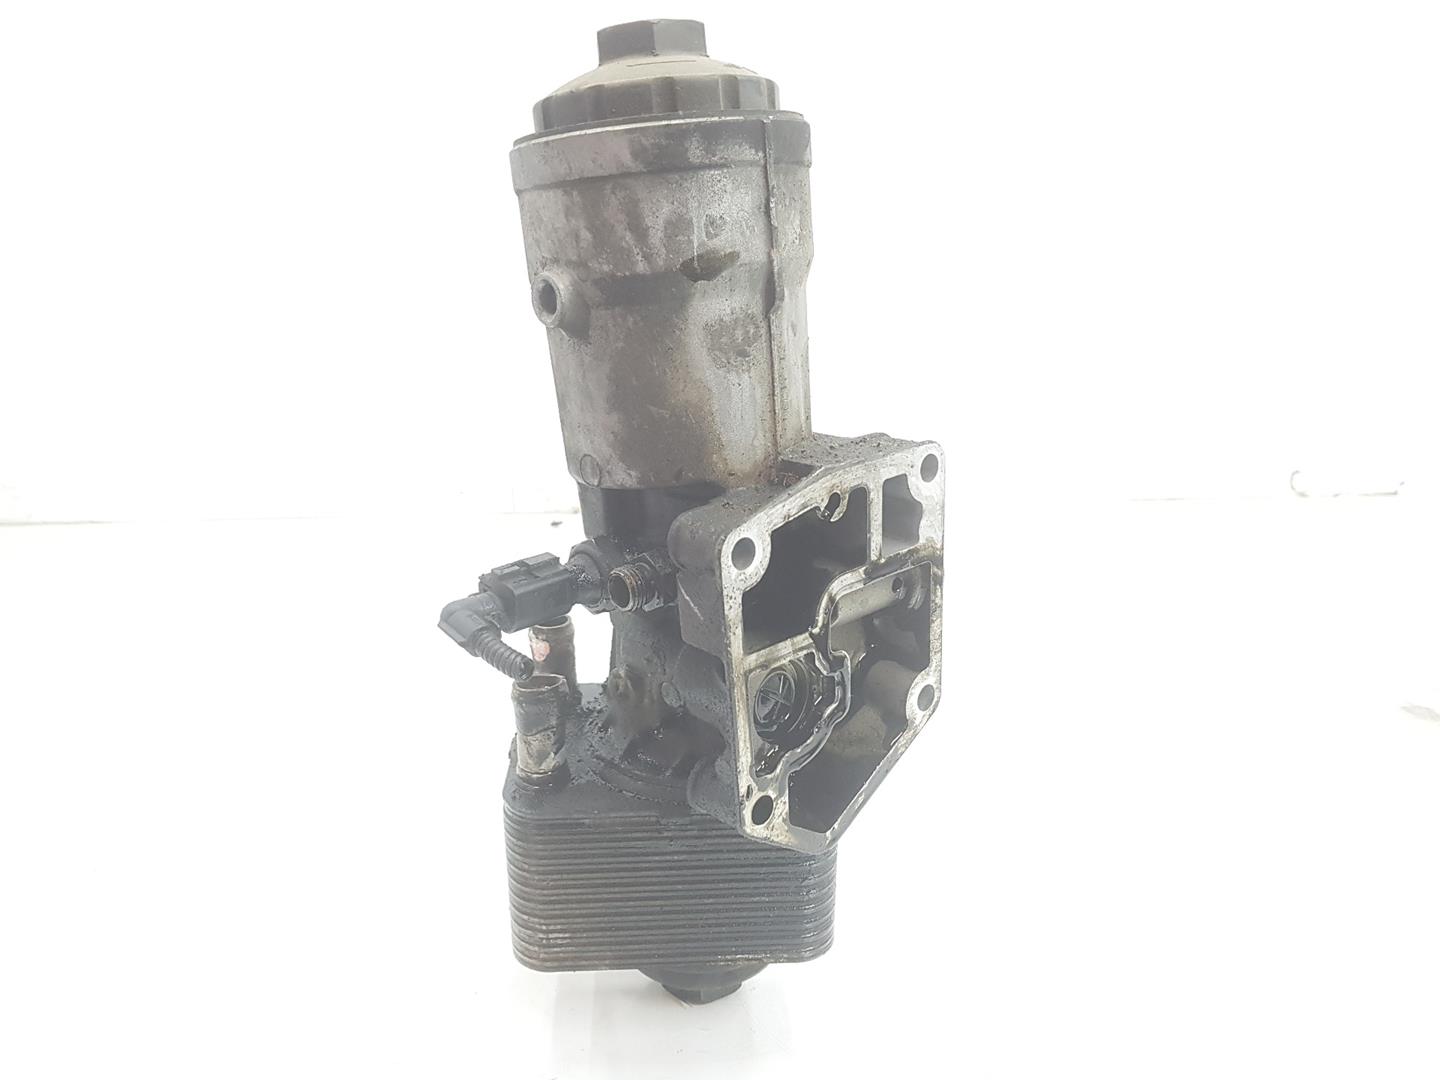 SEAT Toledo 3 generation (2004-2010) Other Engine Compartment Parts 045115389E, 045115389K 23750182